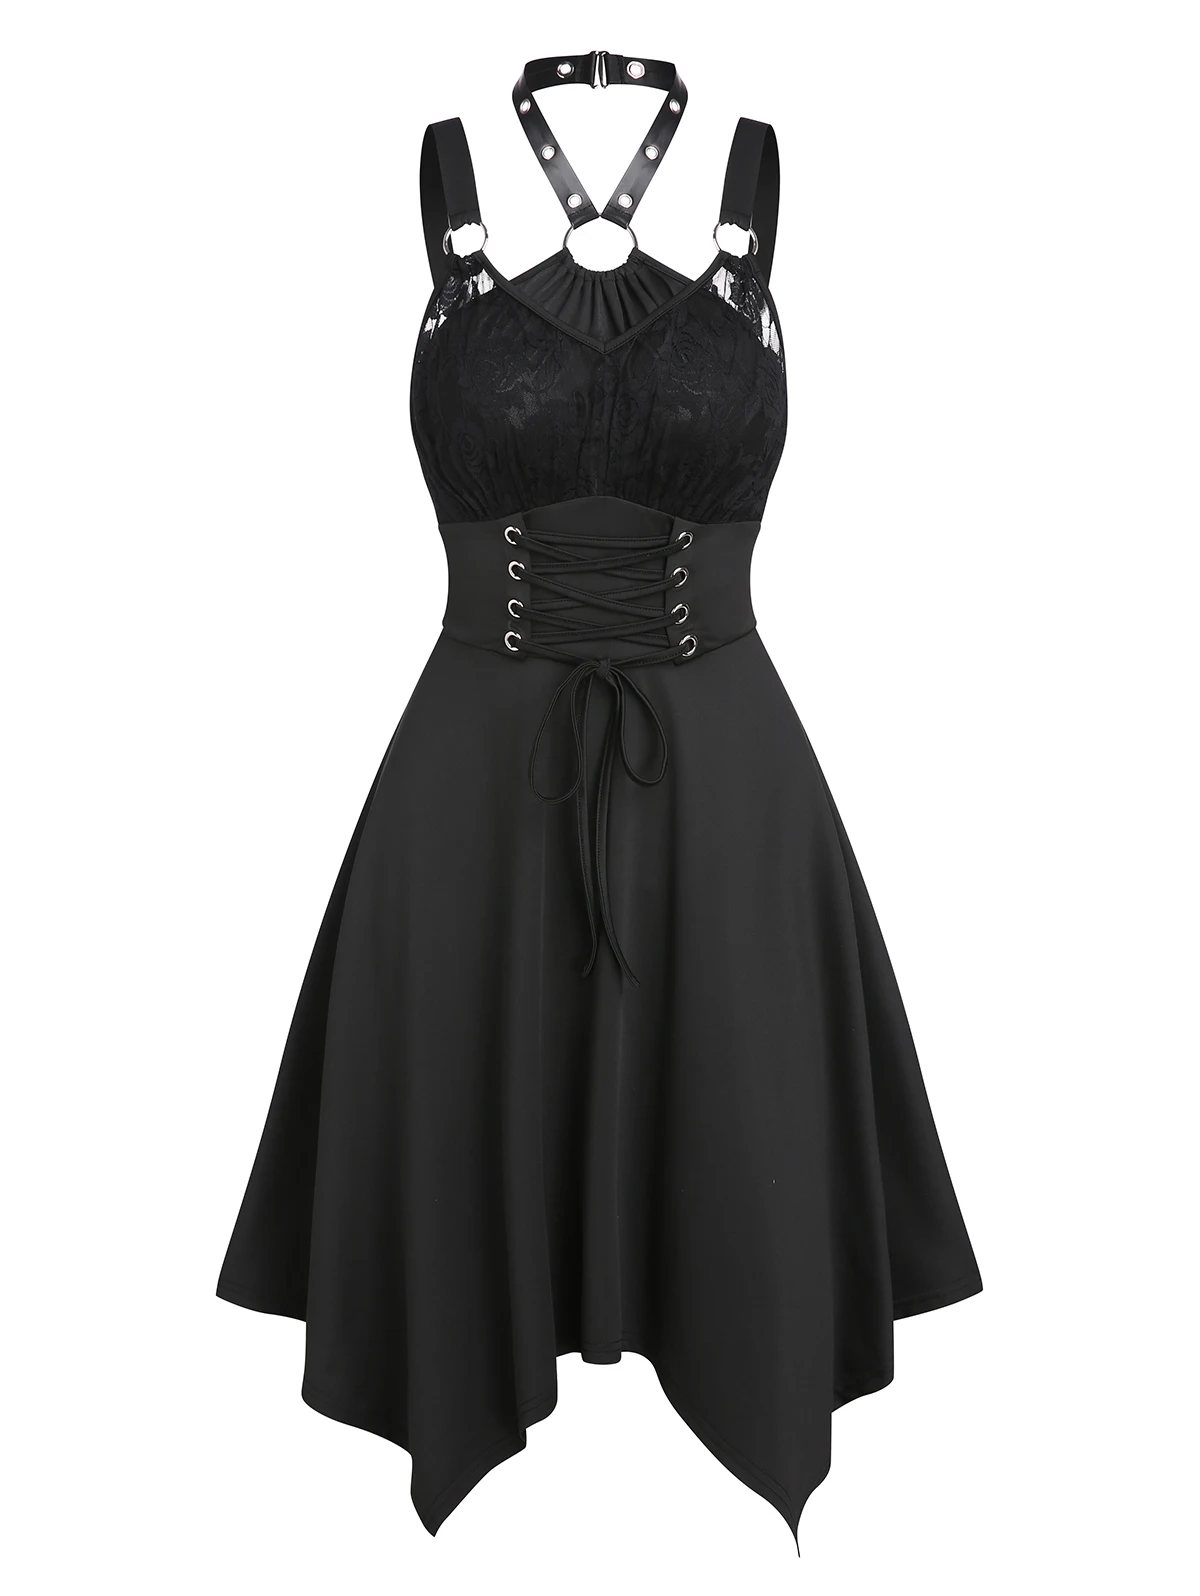 Sexy Chic Retro Gothic Faux Leather Insert Lace Up High Low Dress Woman Harajuku Jurken